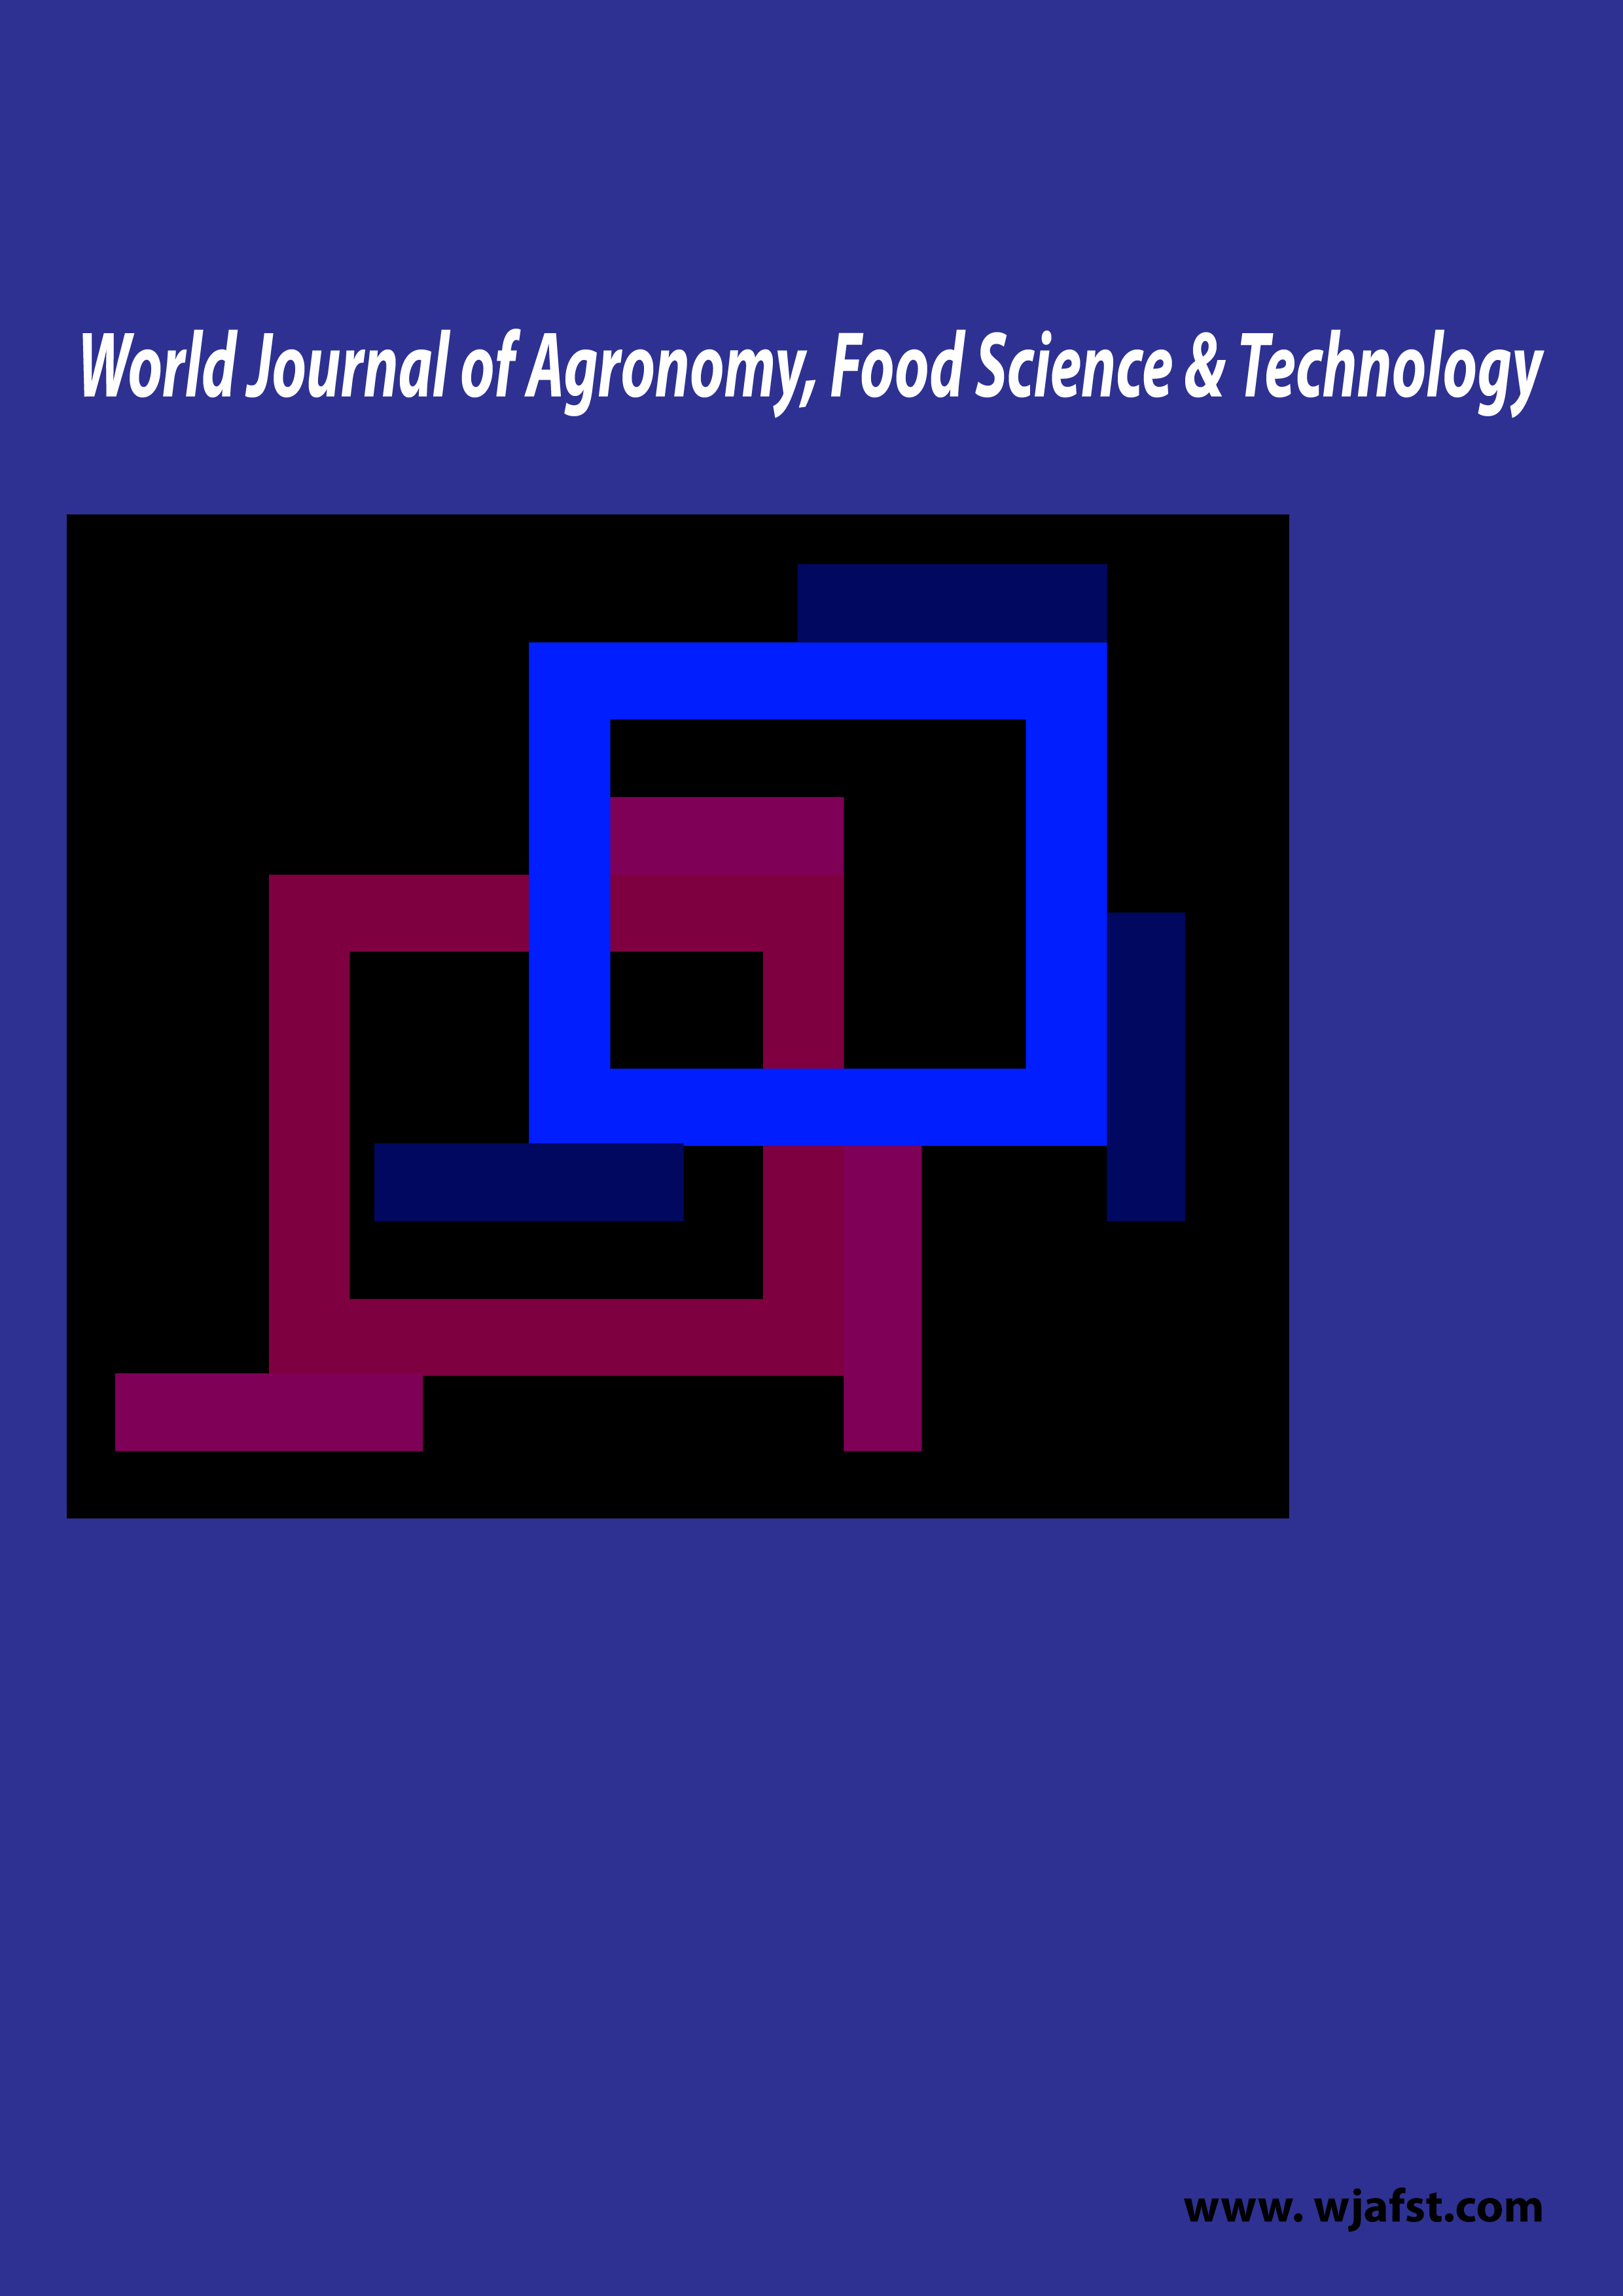 World Journal of Agronomy, Food Science & Technology